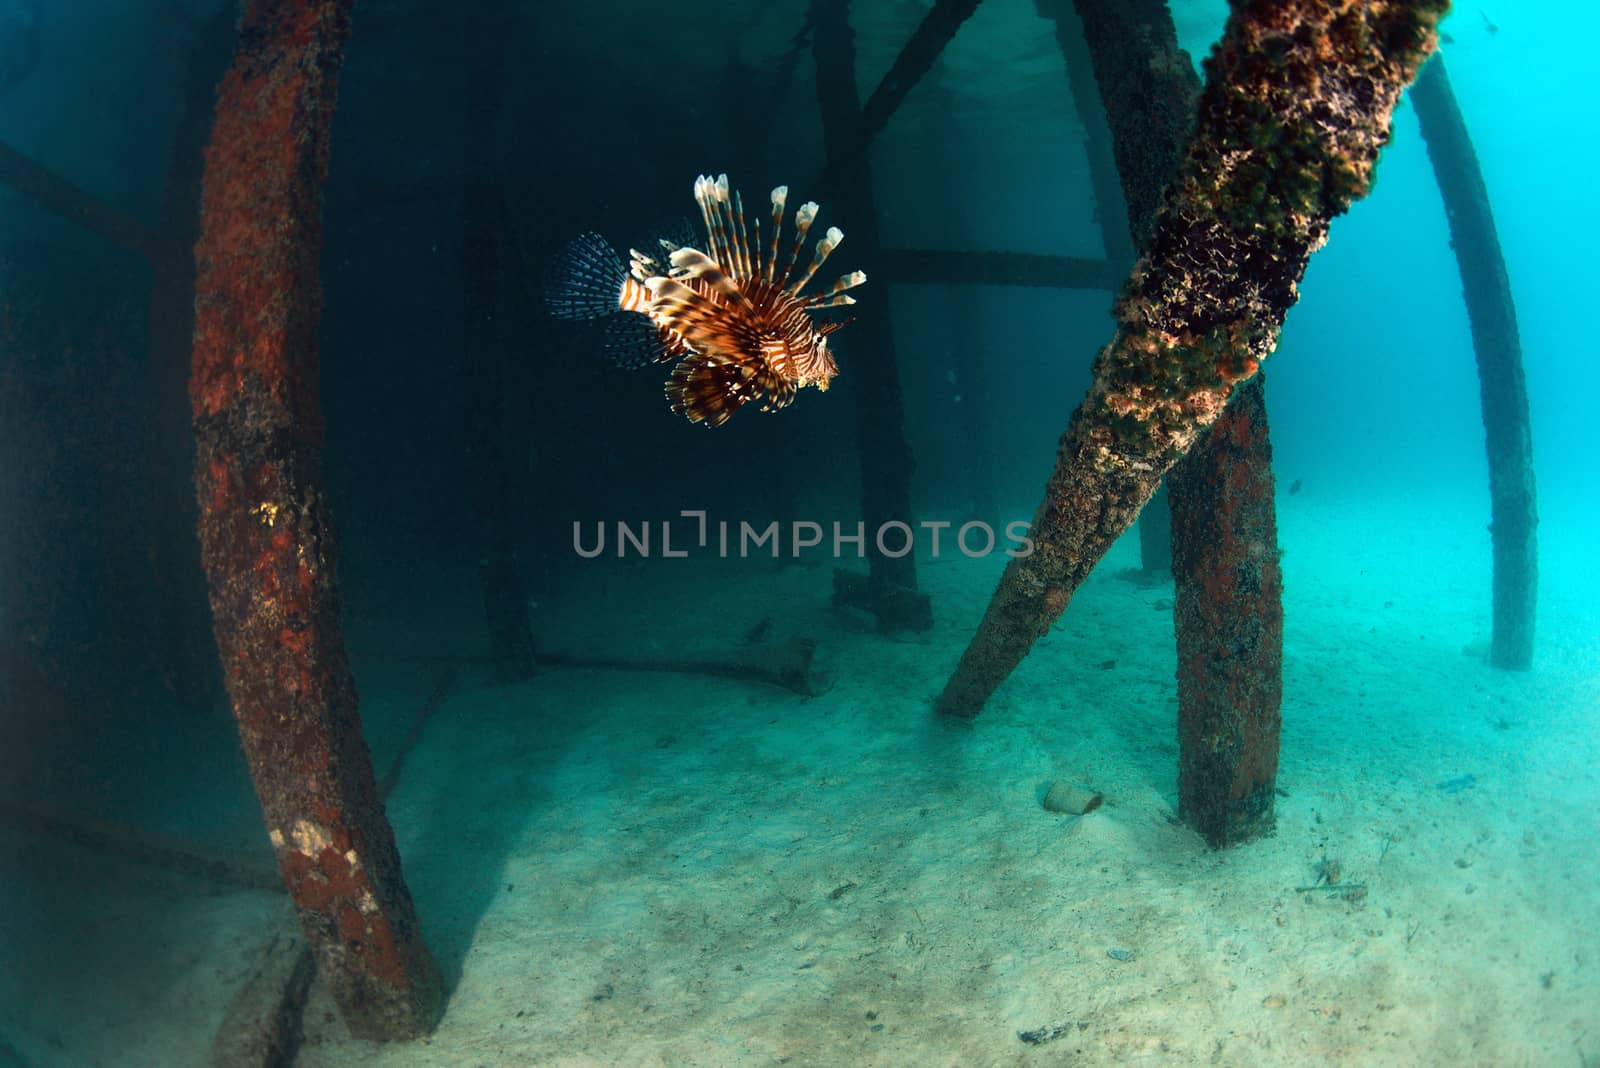 Lionfish at dive center in Mabul, Sipadan, Malaysia by think4photop